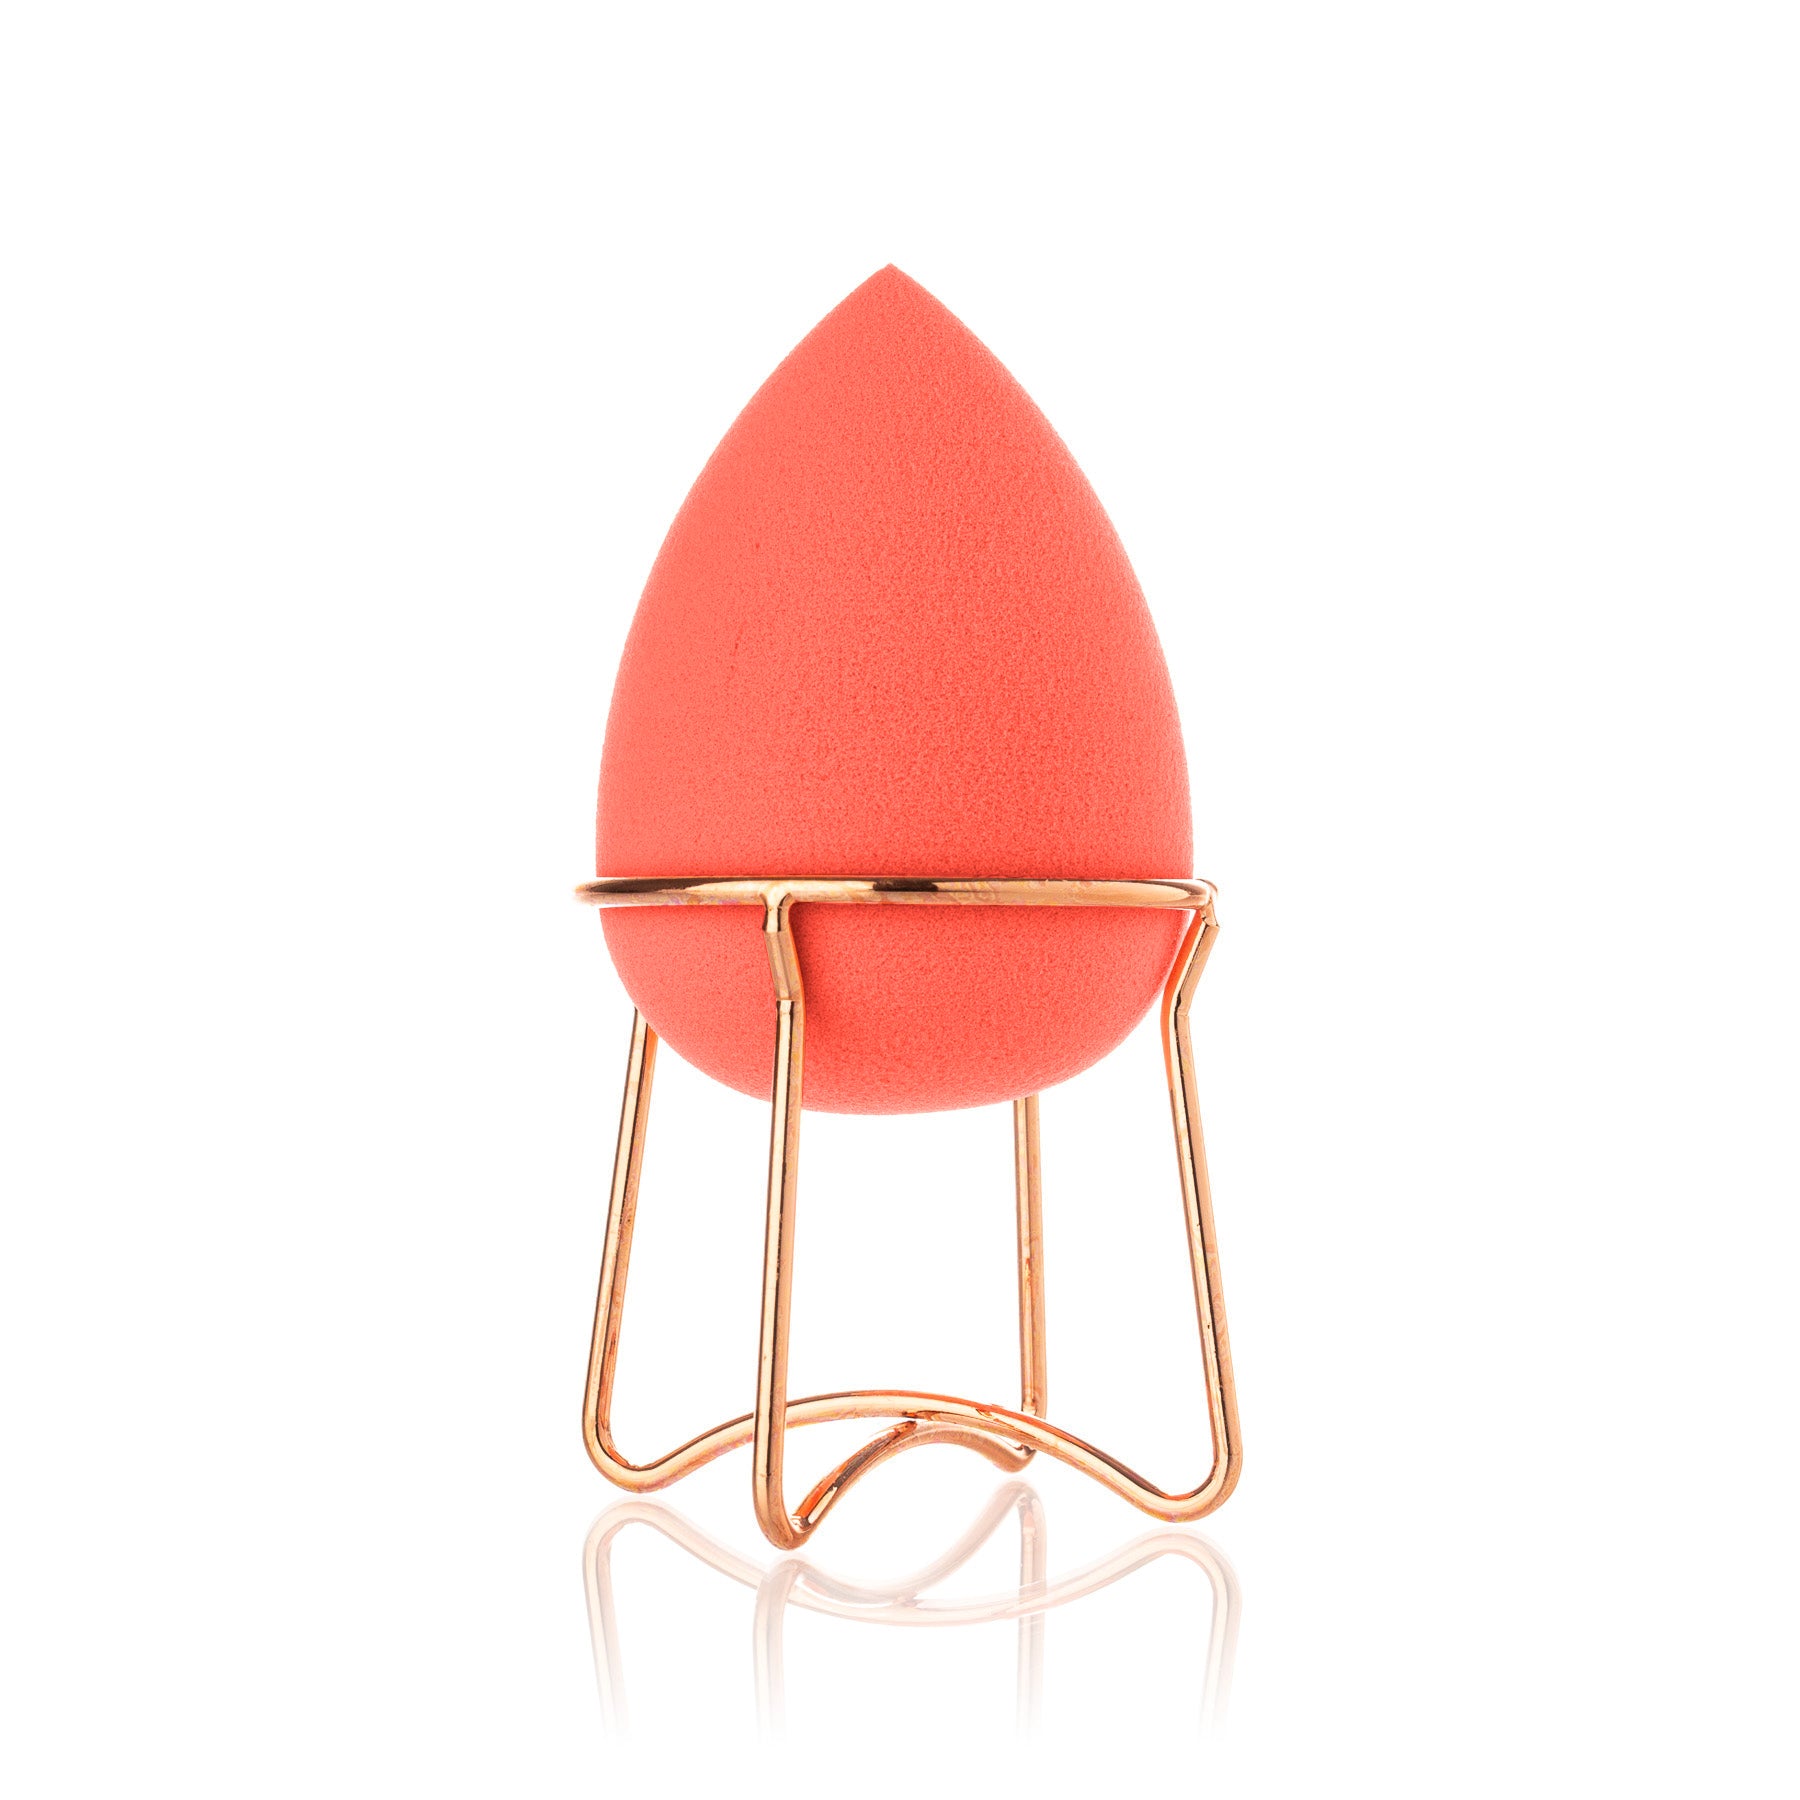 Professional Beauty Blender with Rose Gold Stand